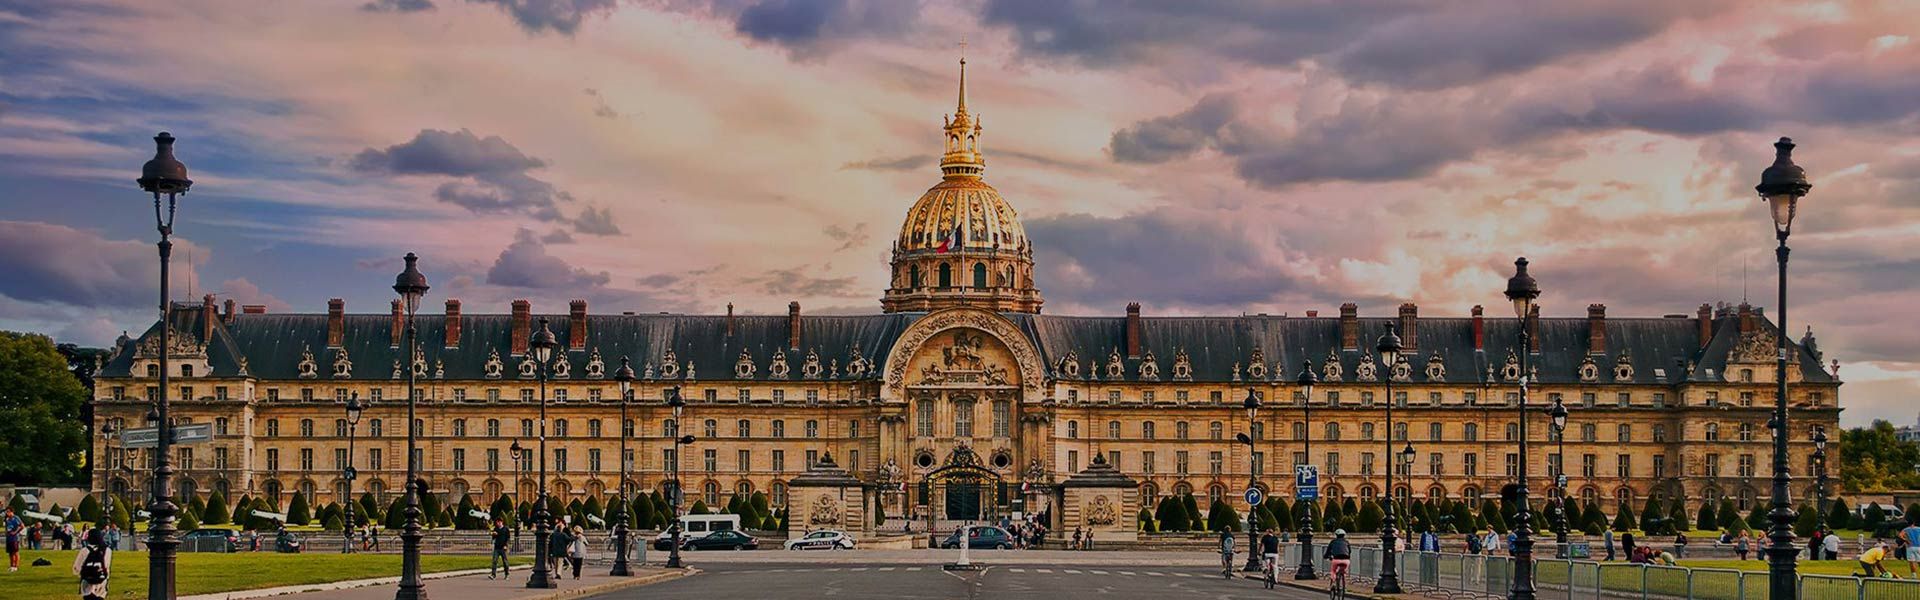 Les Invalides - Things To Do at Pont Alexandre III Bridge Paris Olympics 2024 | Top Attractions, Night Life, Restaurants